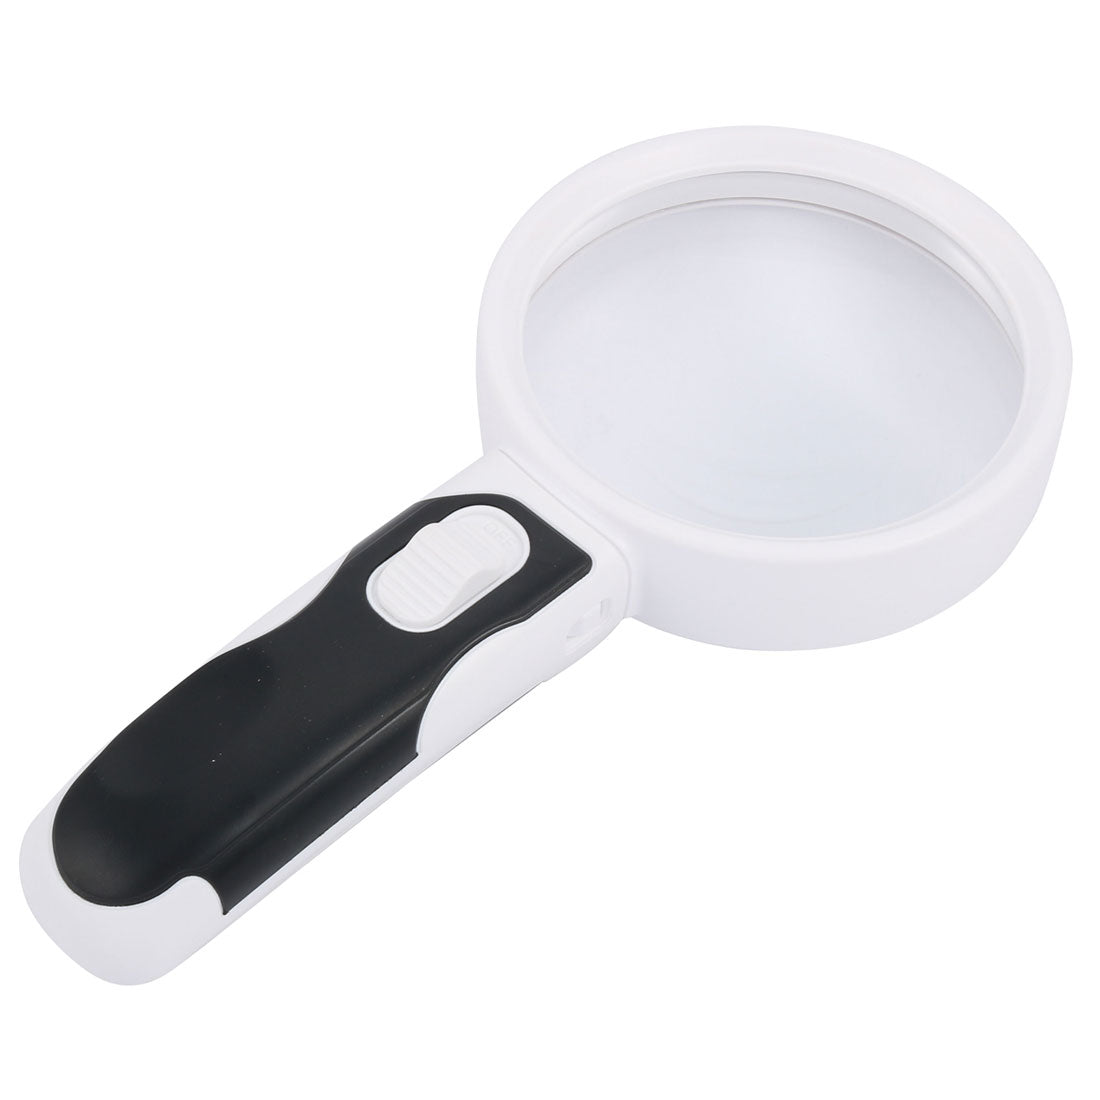 uxcell Uxcell Lighted Illuminated Magnifier Handheld Magnifying Glass 20X w LED Light